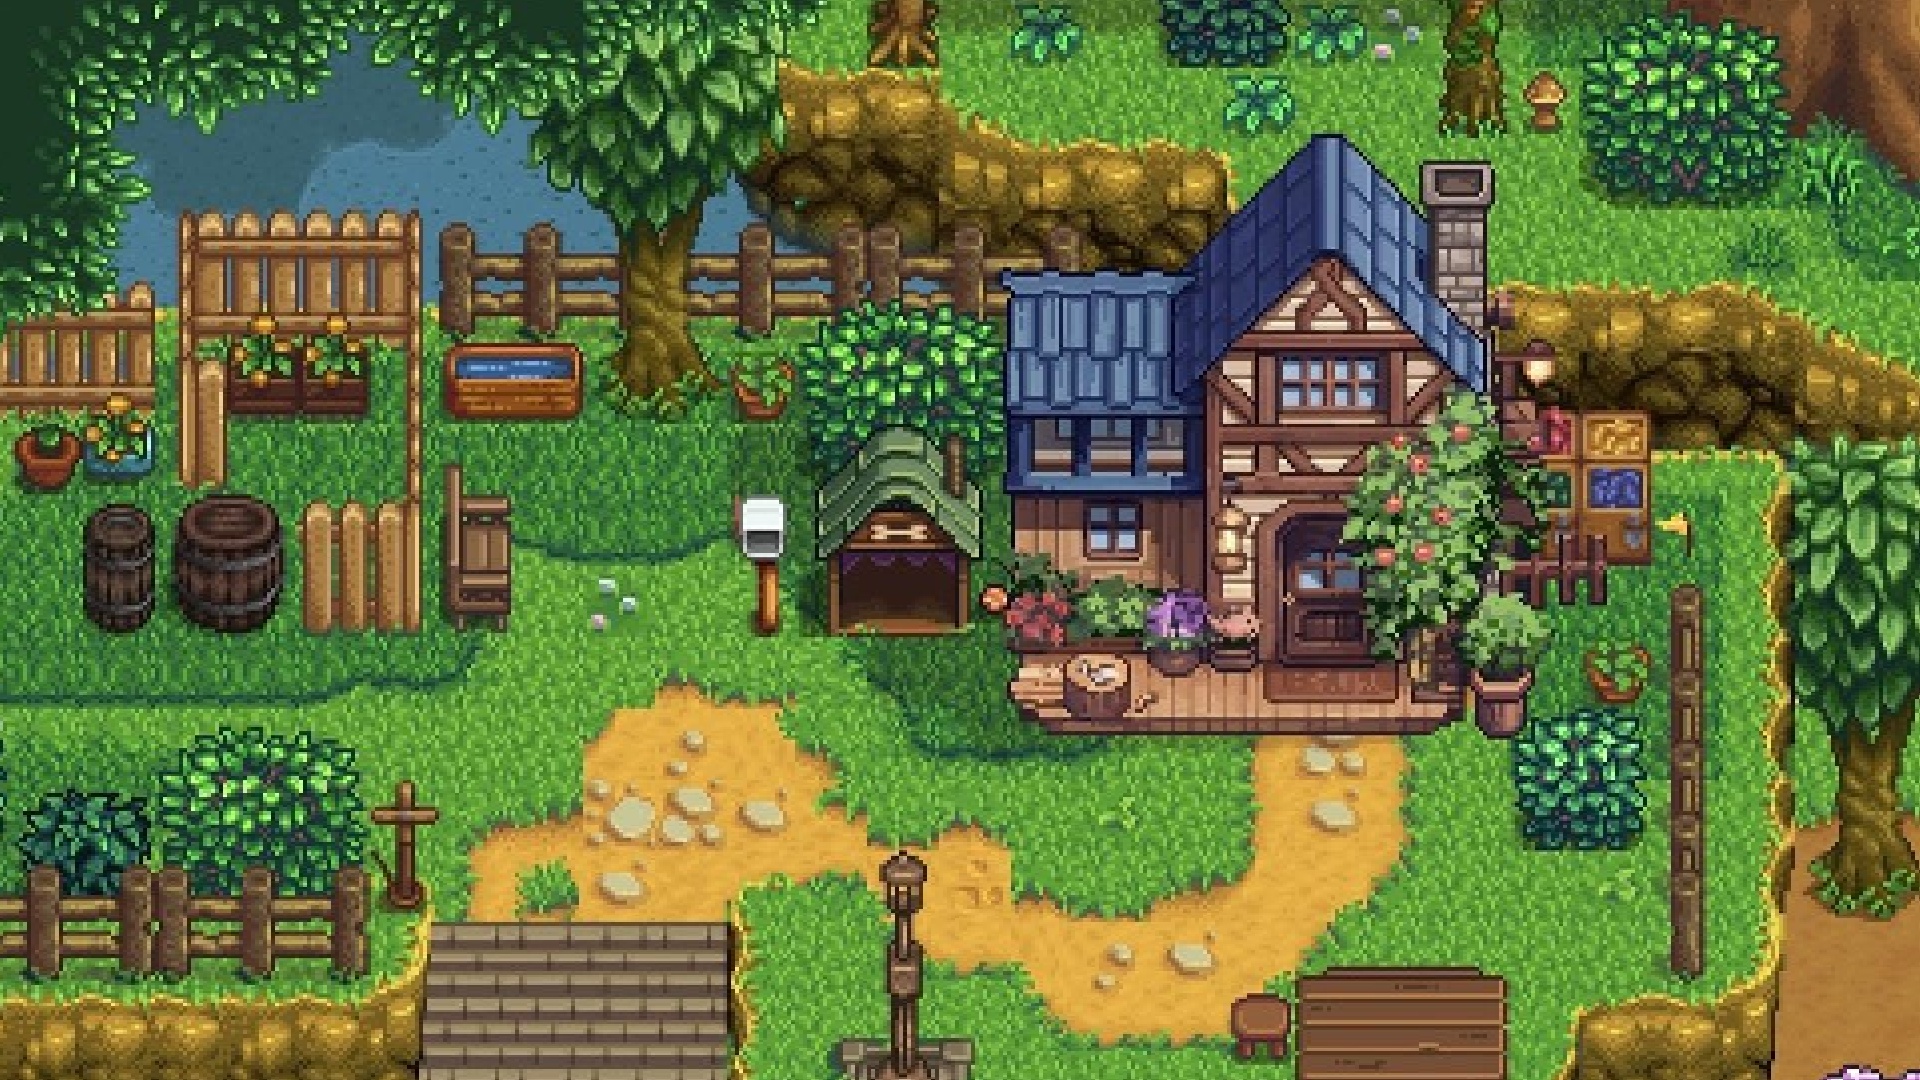 One of the houses in the BG3 Stardew Valley mod